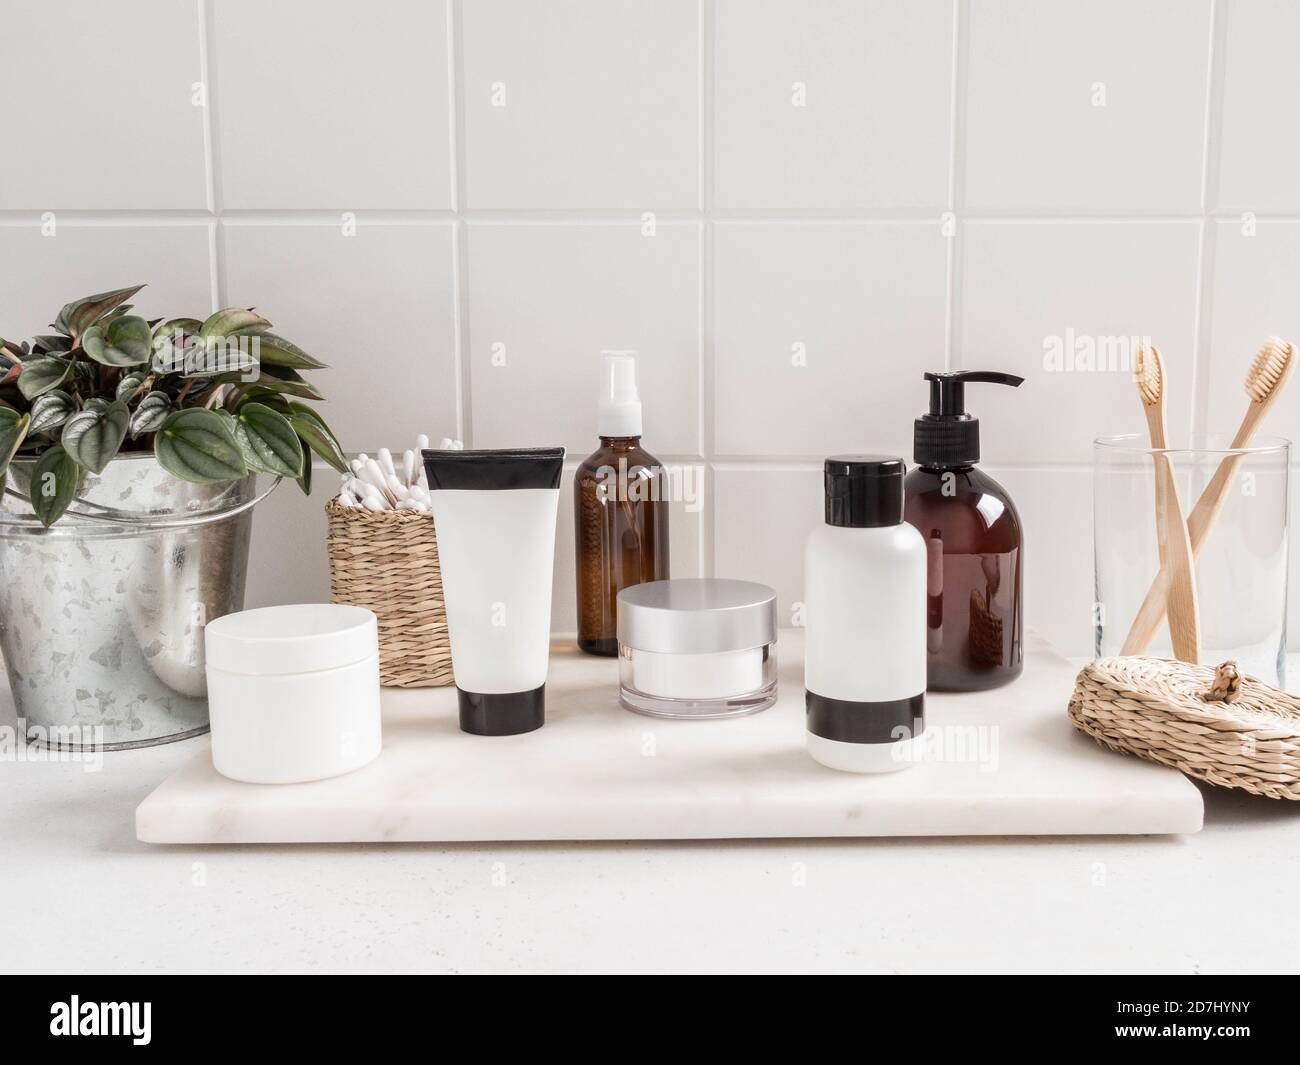 Stylish white bath background with cosmetic bottles, bath accessories and greenhouse plant on white shelf and wall tiles, place for text, bathroom in Stock Photo